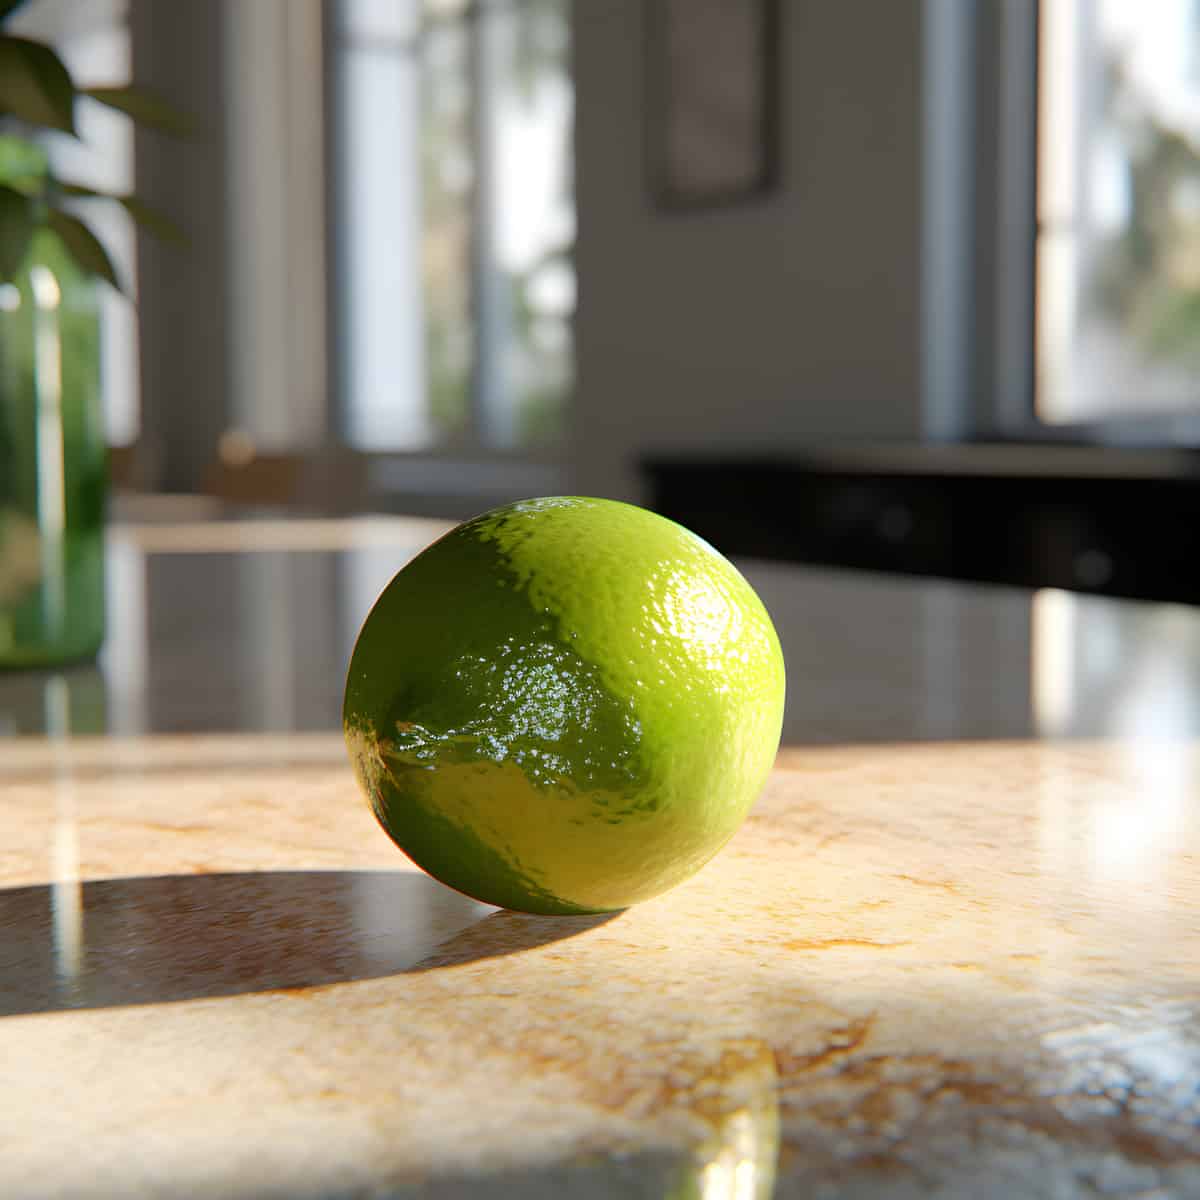 Round Lime on a kitchen counter